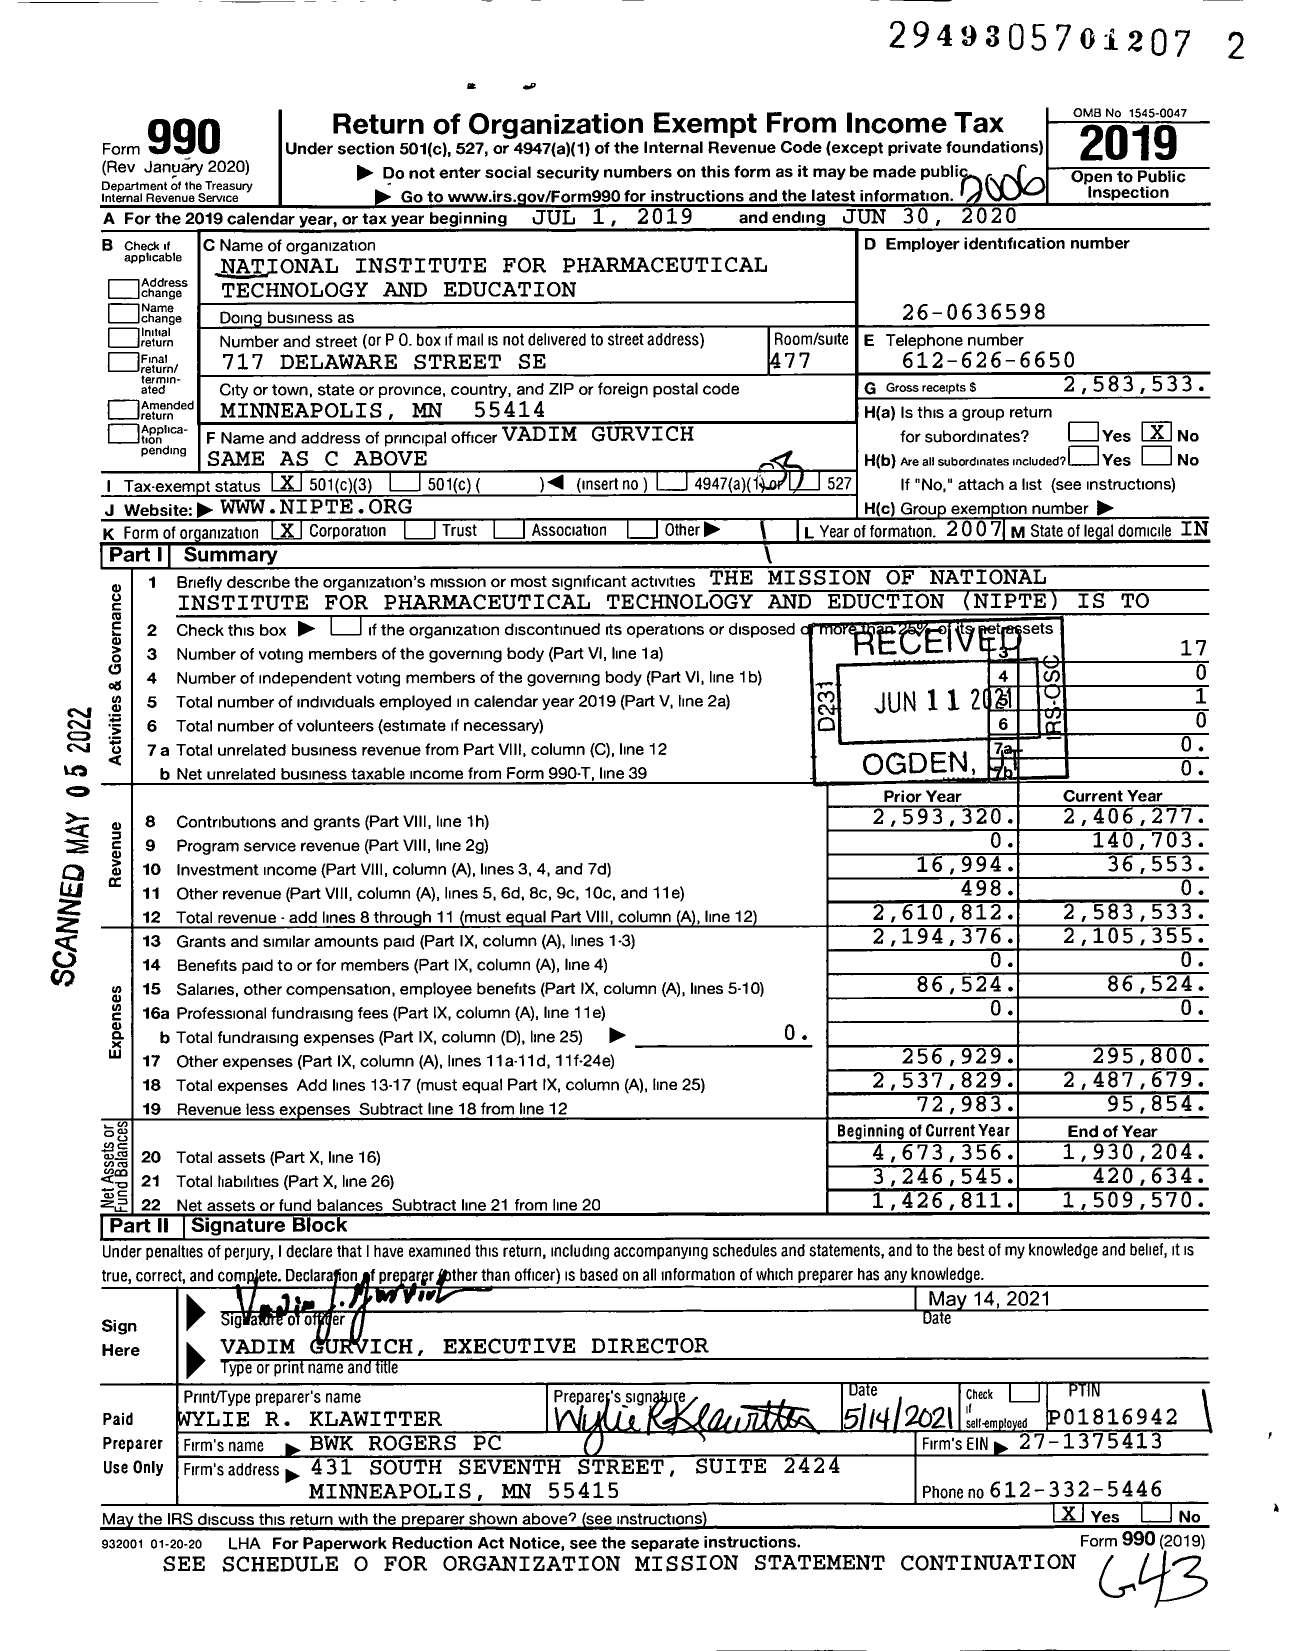 Image of first page of 2019 Form 990 for National Institute Forpharmaceutical Technology and Education (NIPTE)